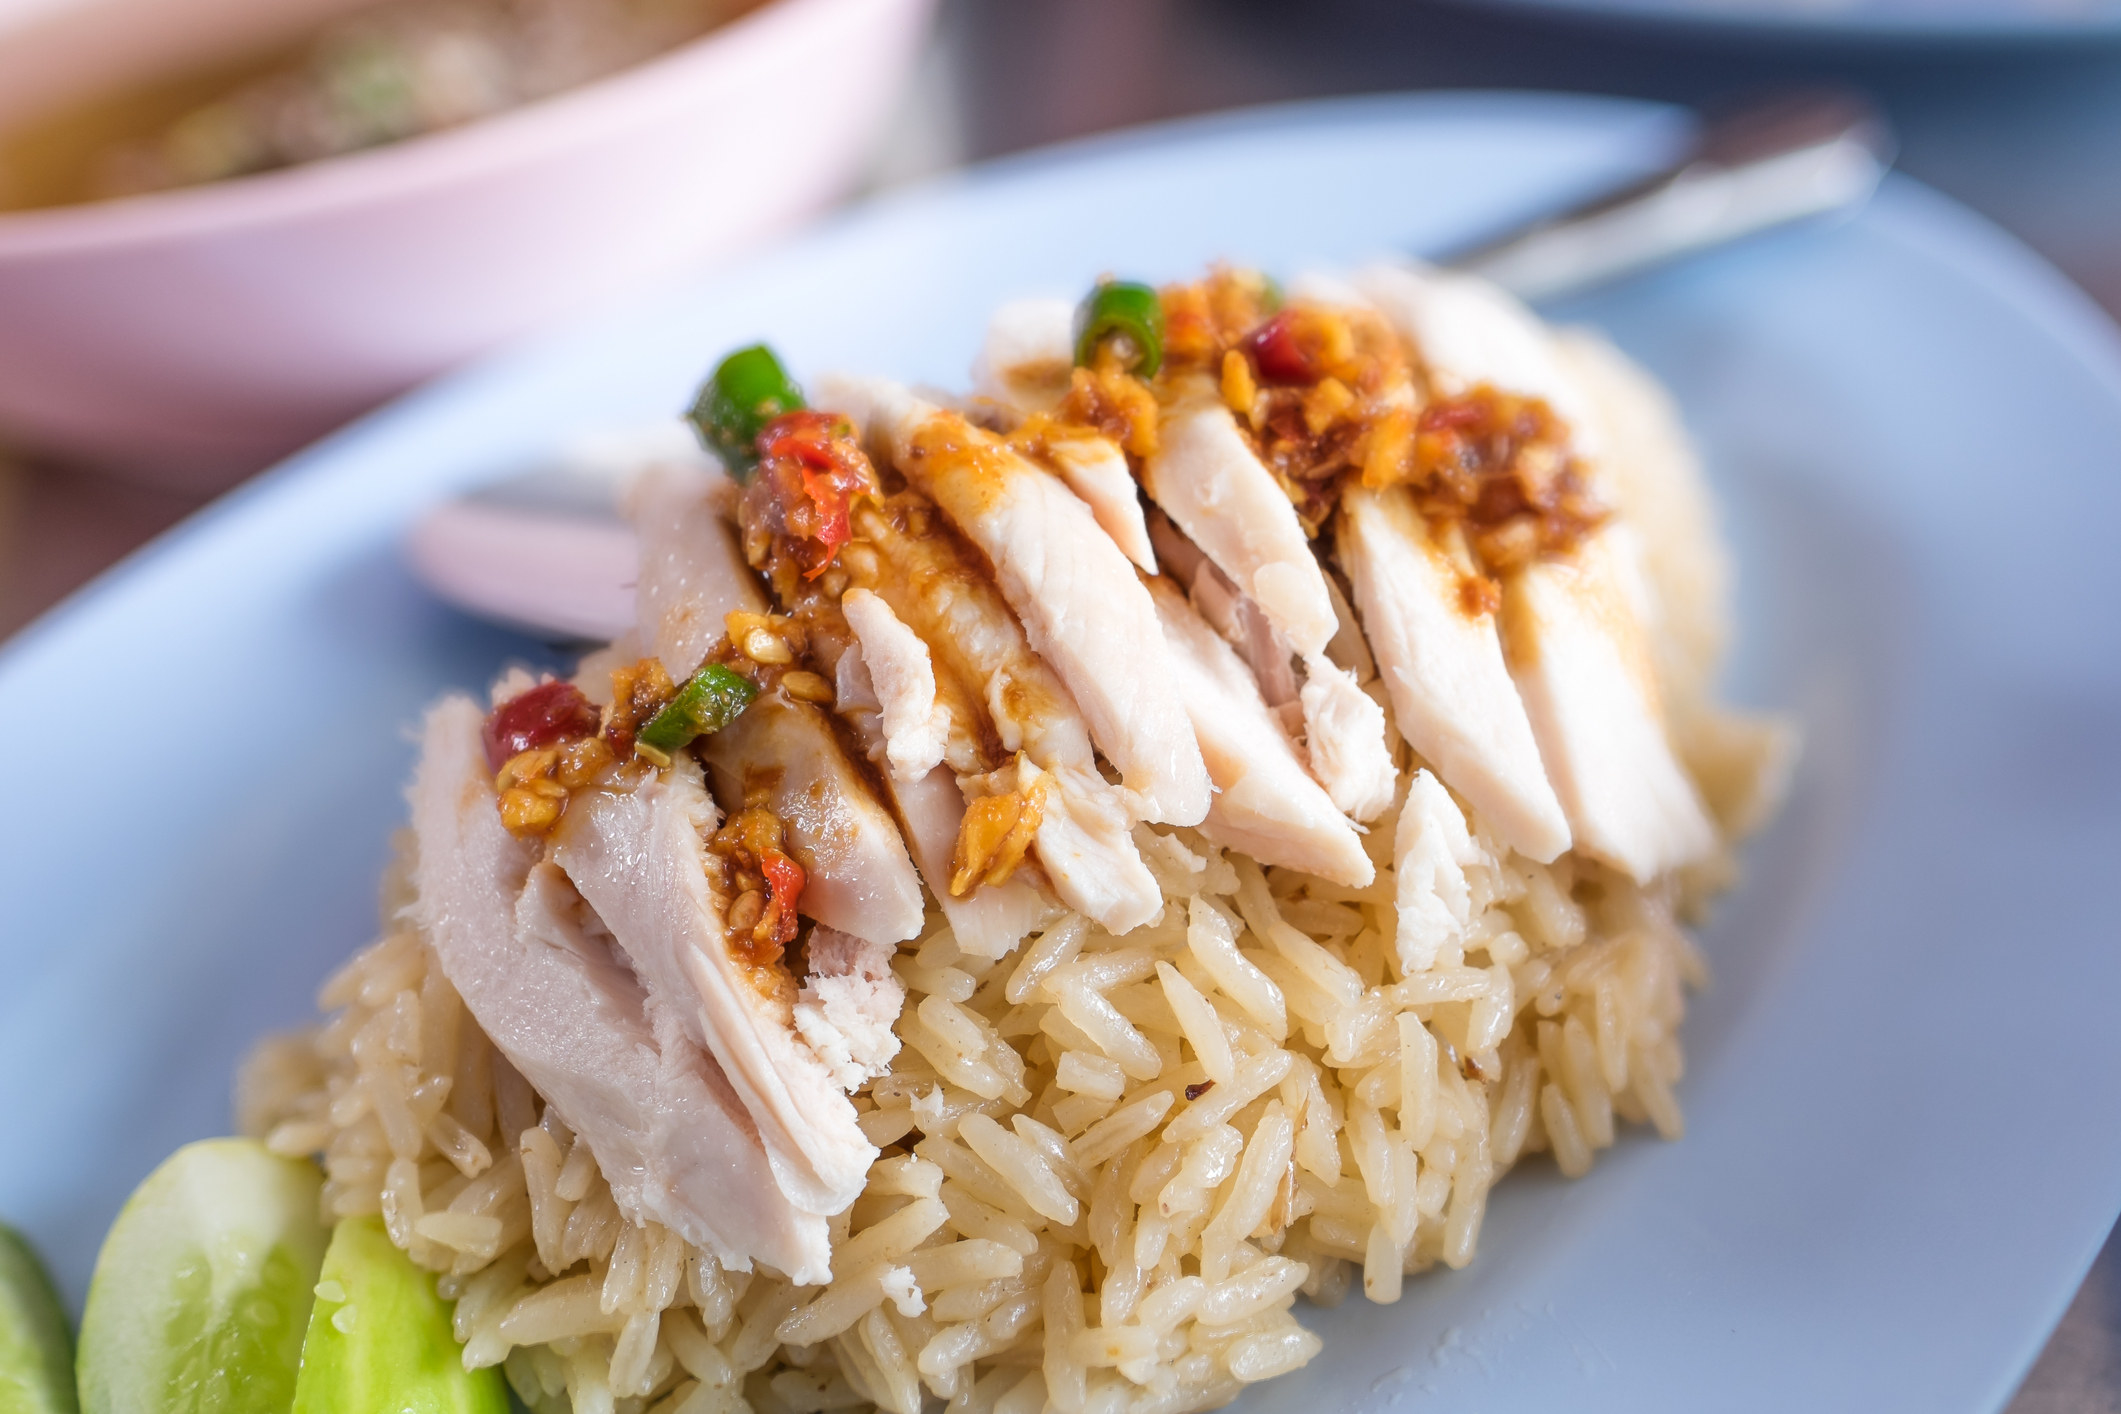 Hainanese chicken rice with a spicy condiment on top